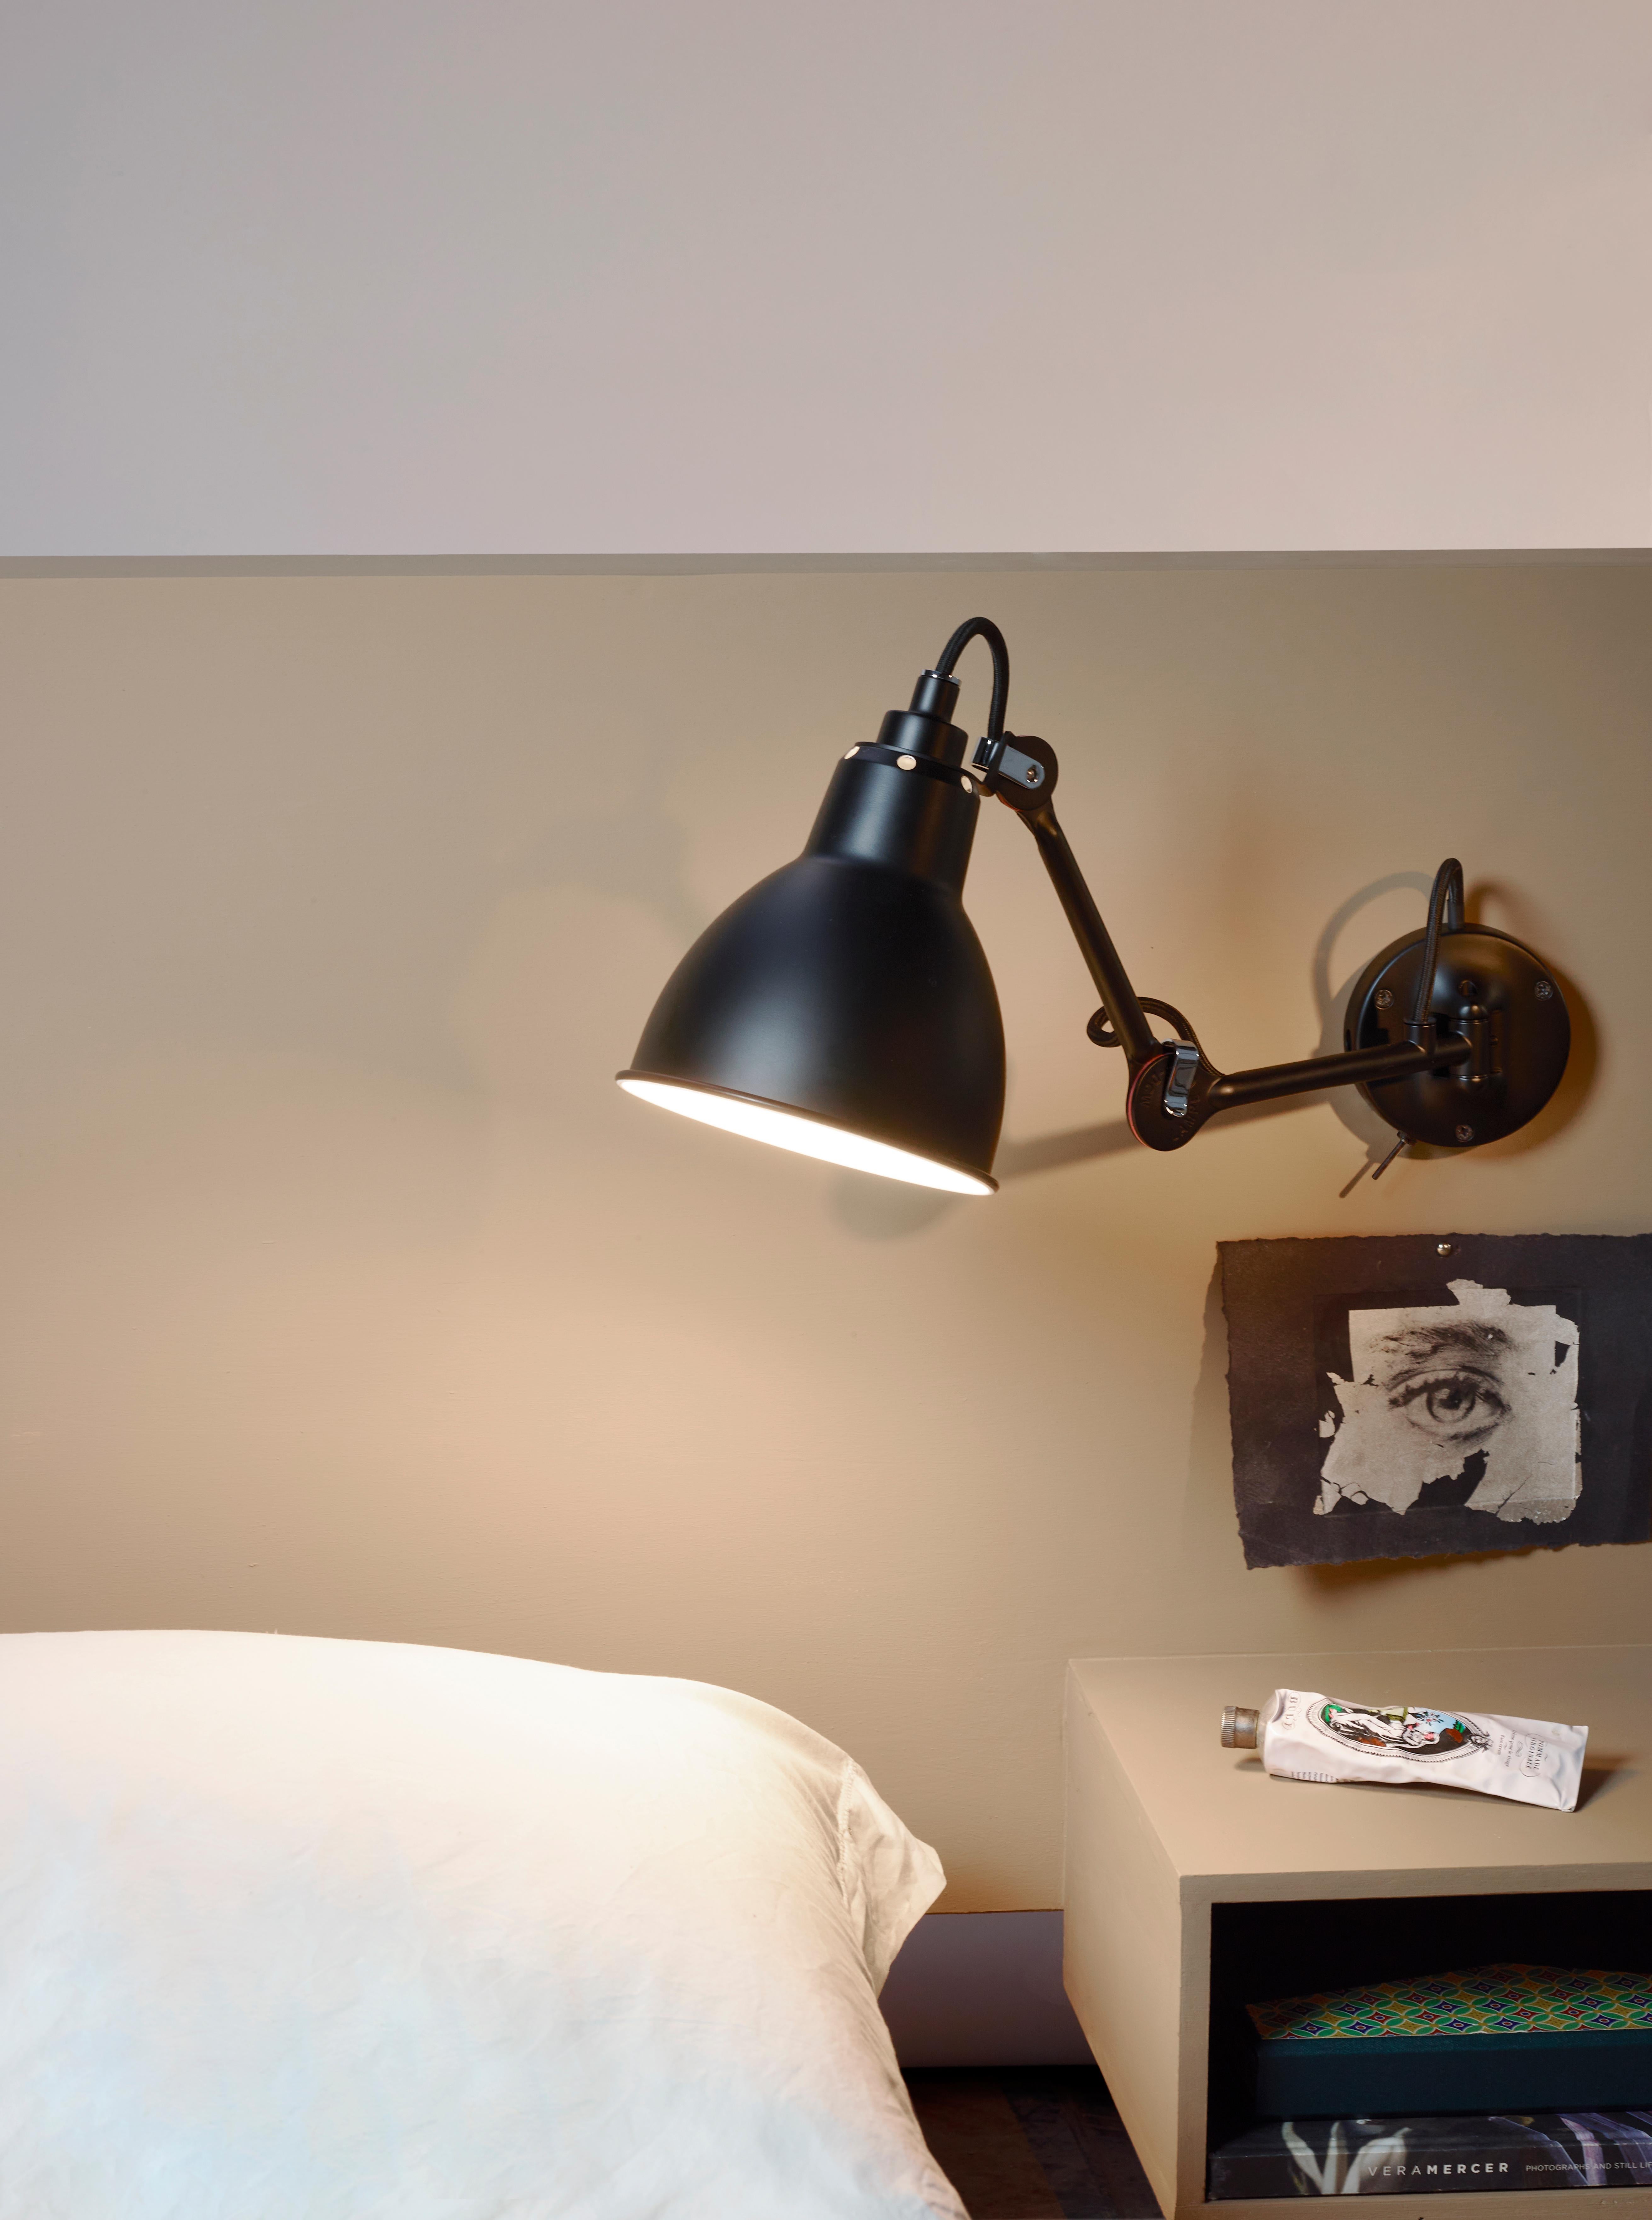 DCW Editions La Lampe Gras N°204 SW Wall Lamp in Black Steel Arm and Black Shade In New Condition For Sale In Brooklyn, NY